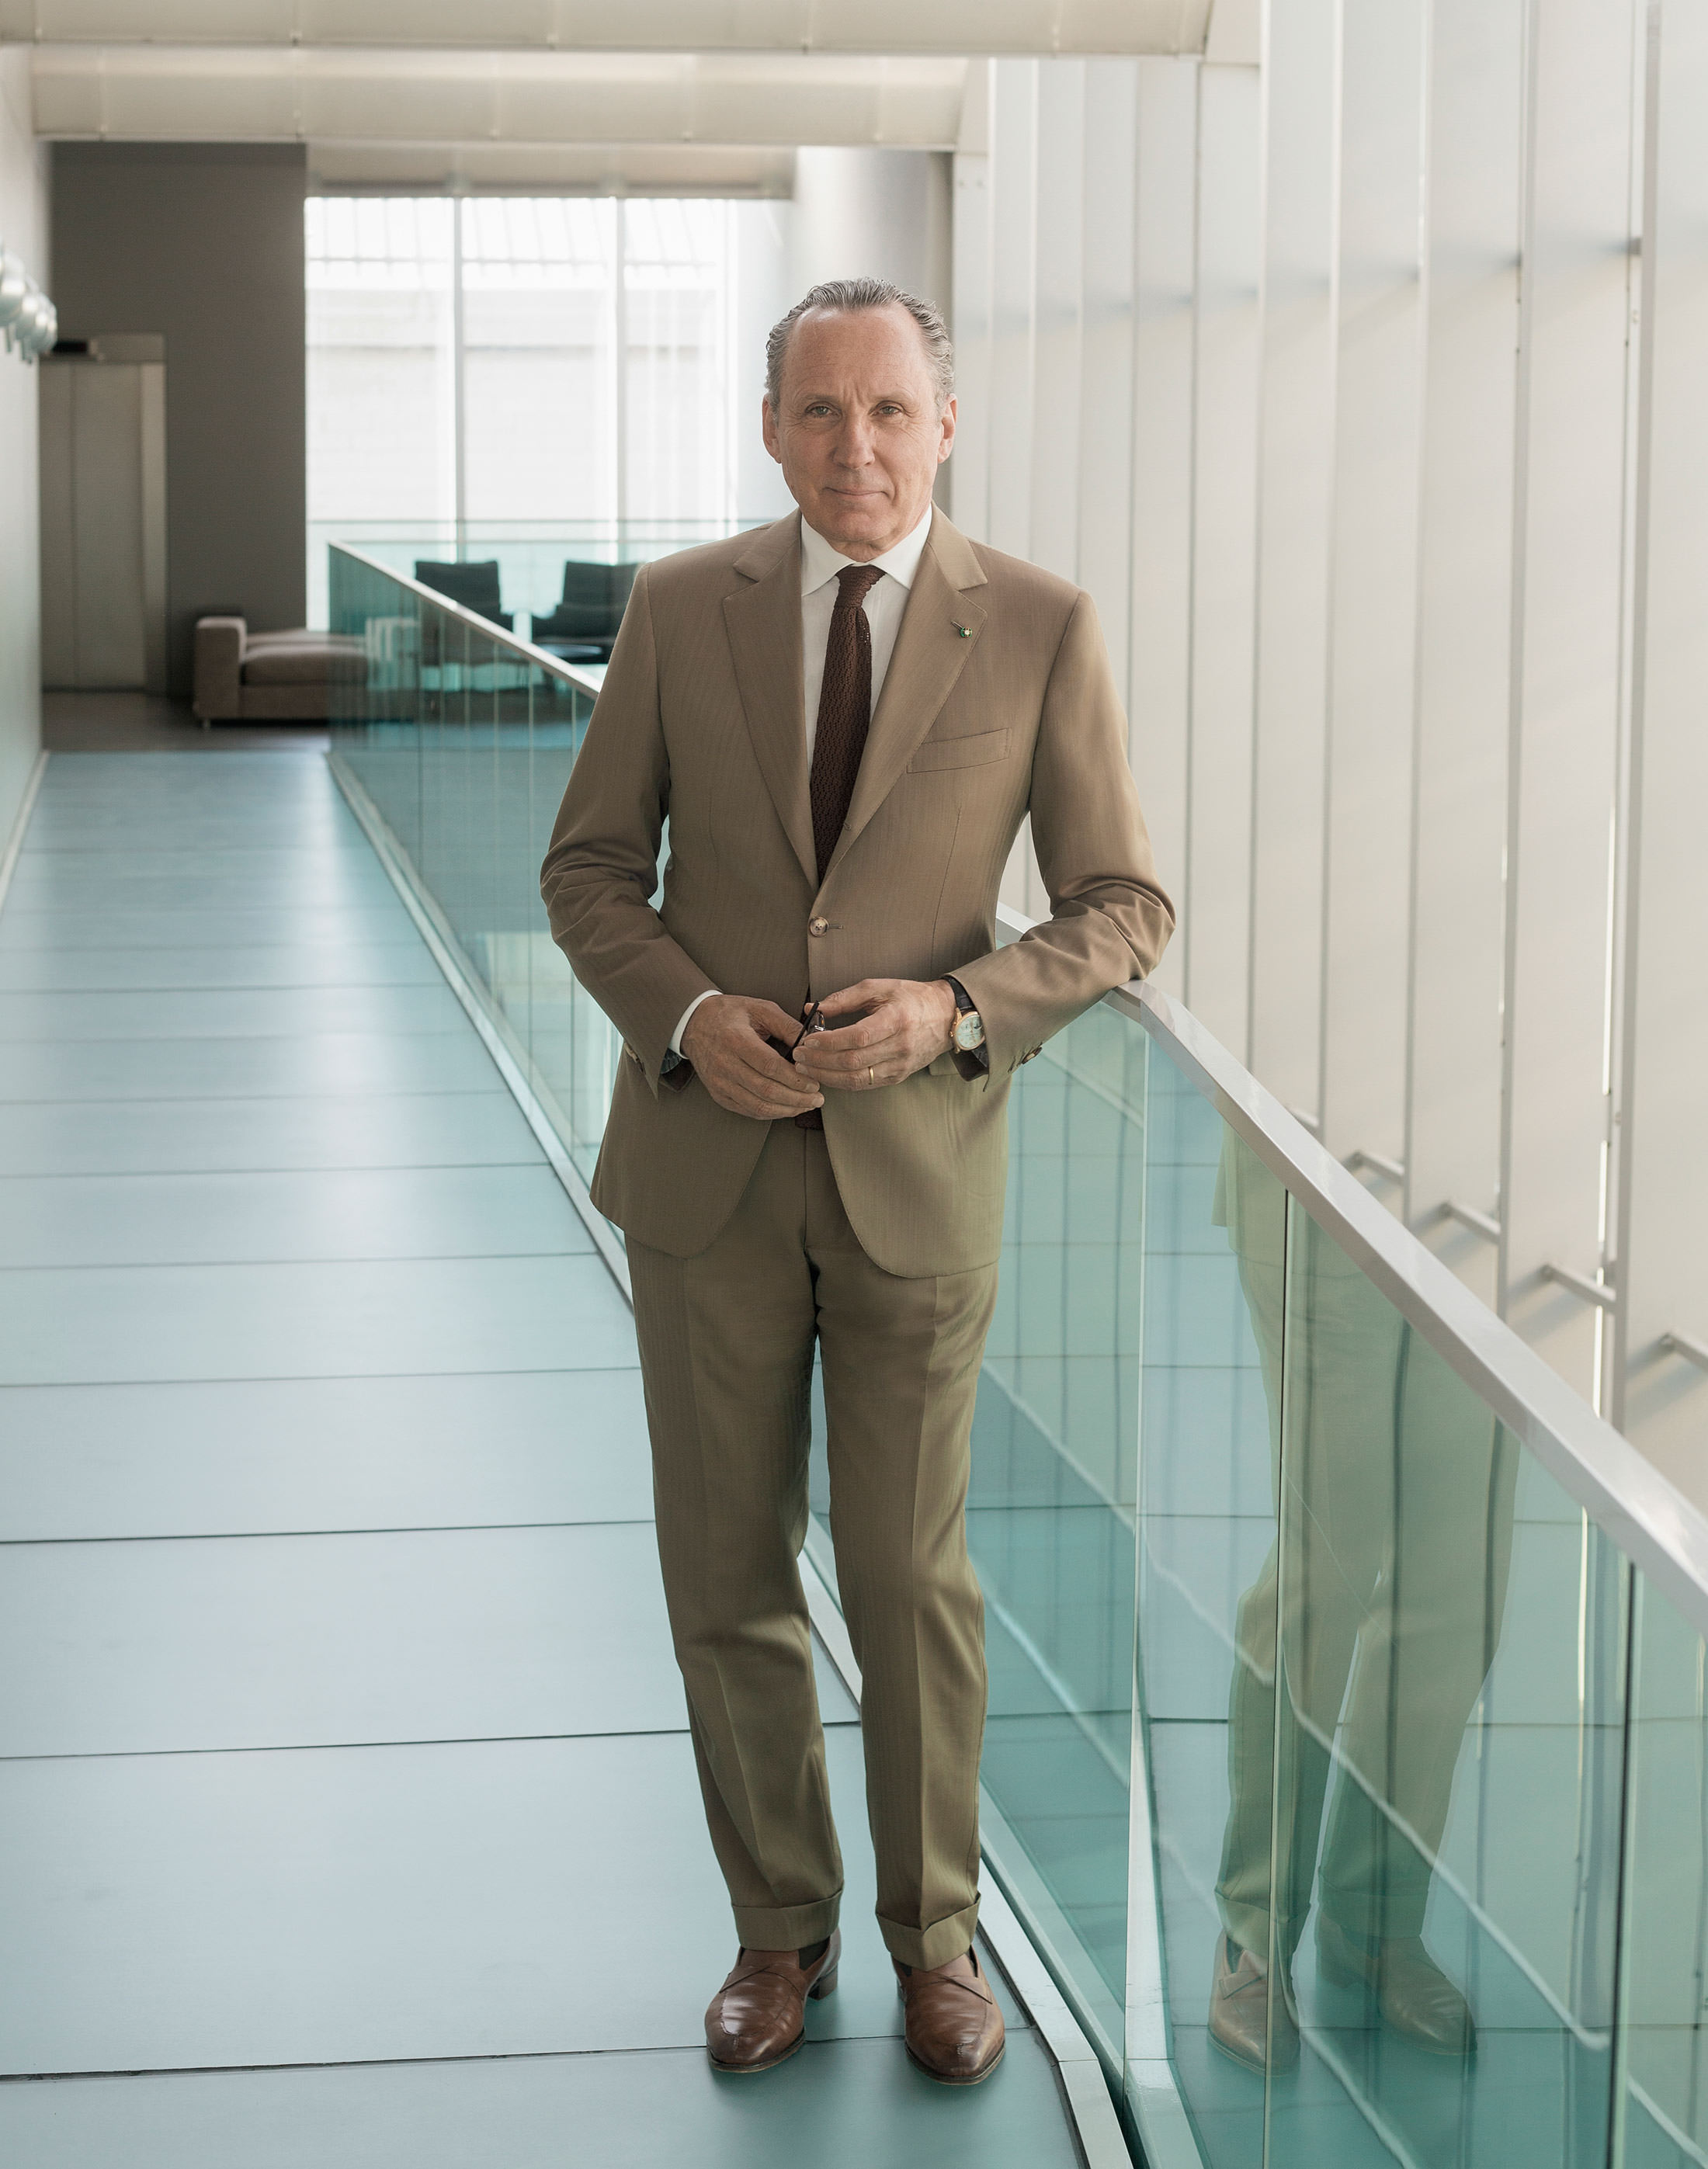 Gildo Zegna: There will always be a place for smart luxury brands